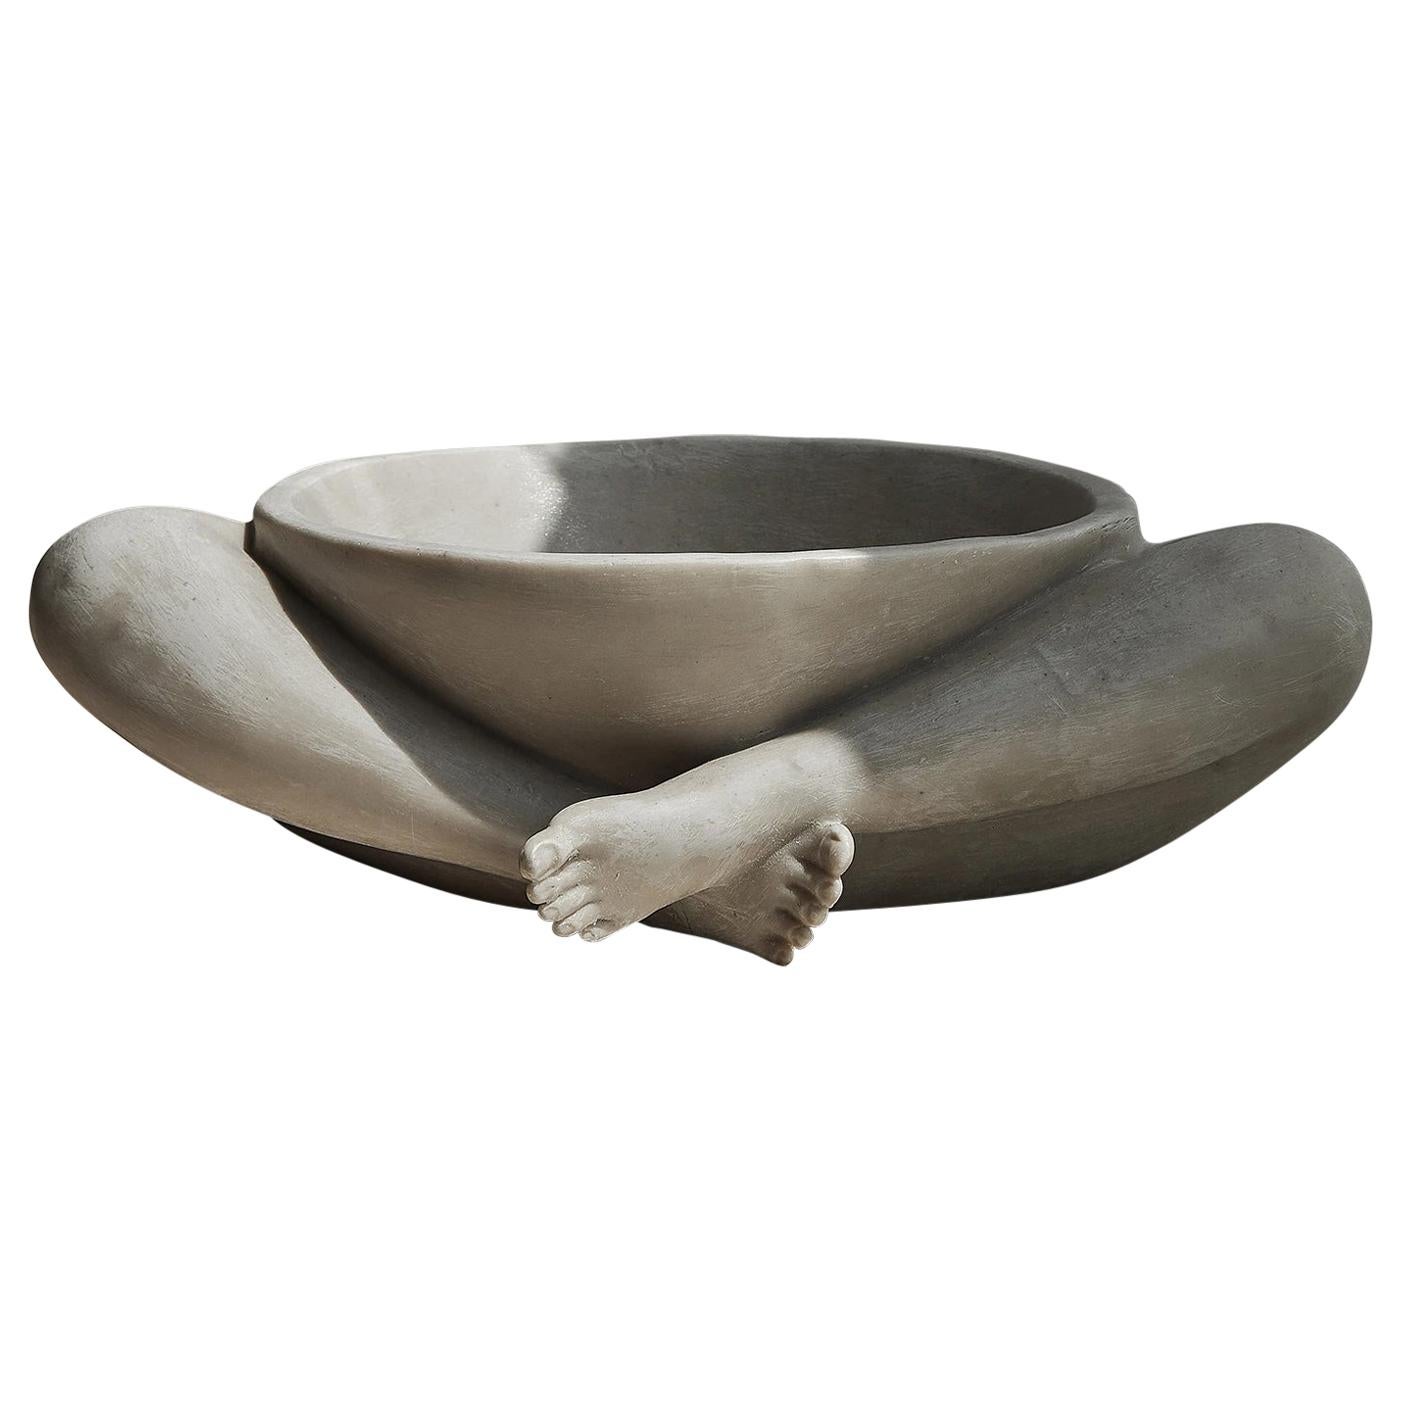 Relaxation Bowl For Sale